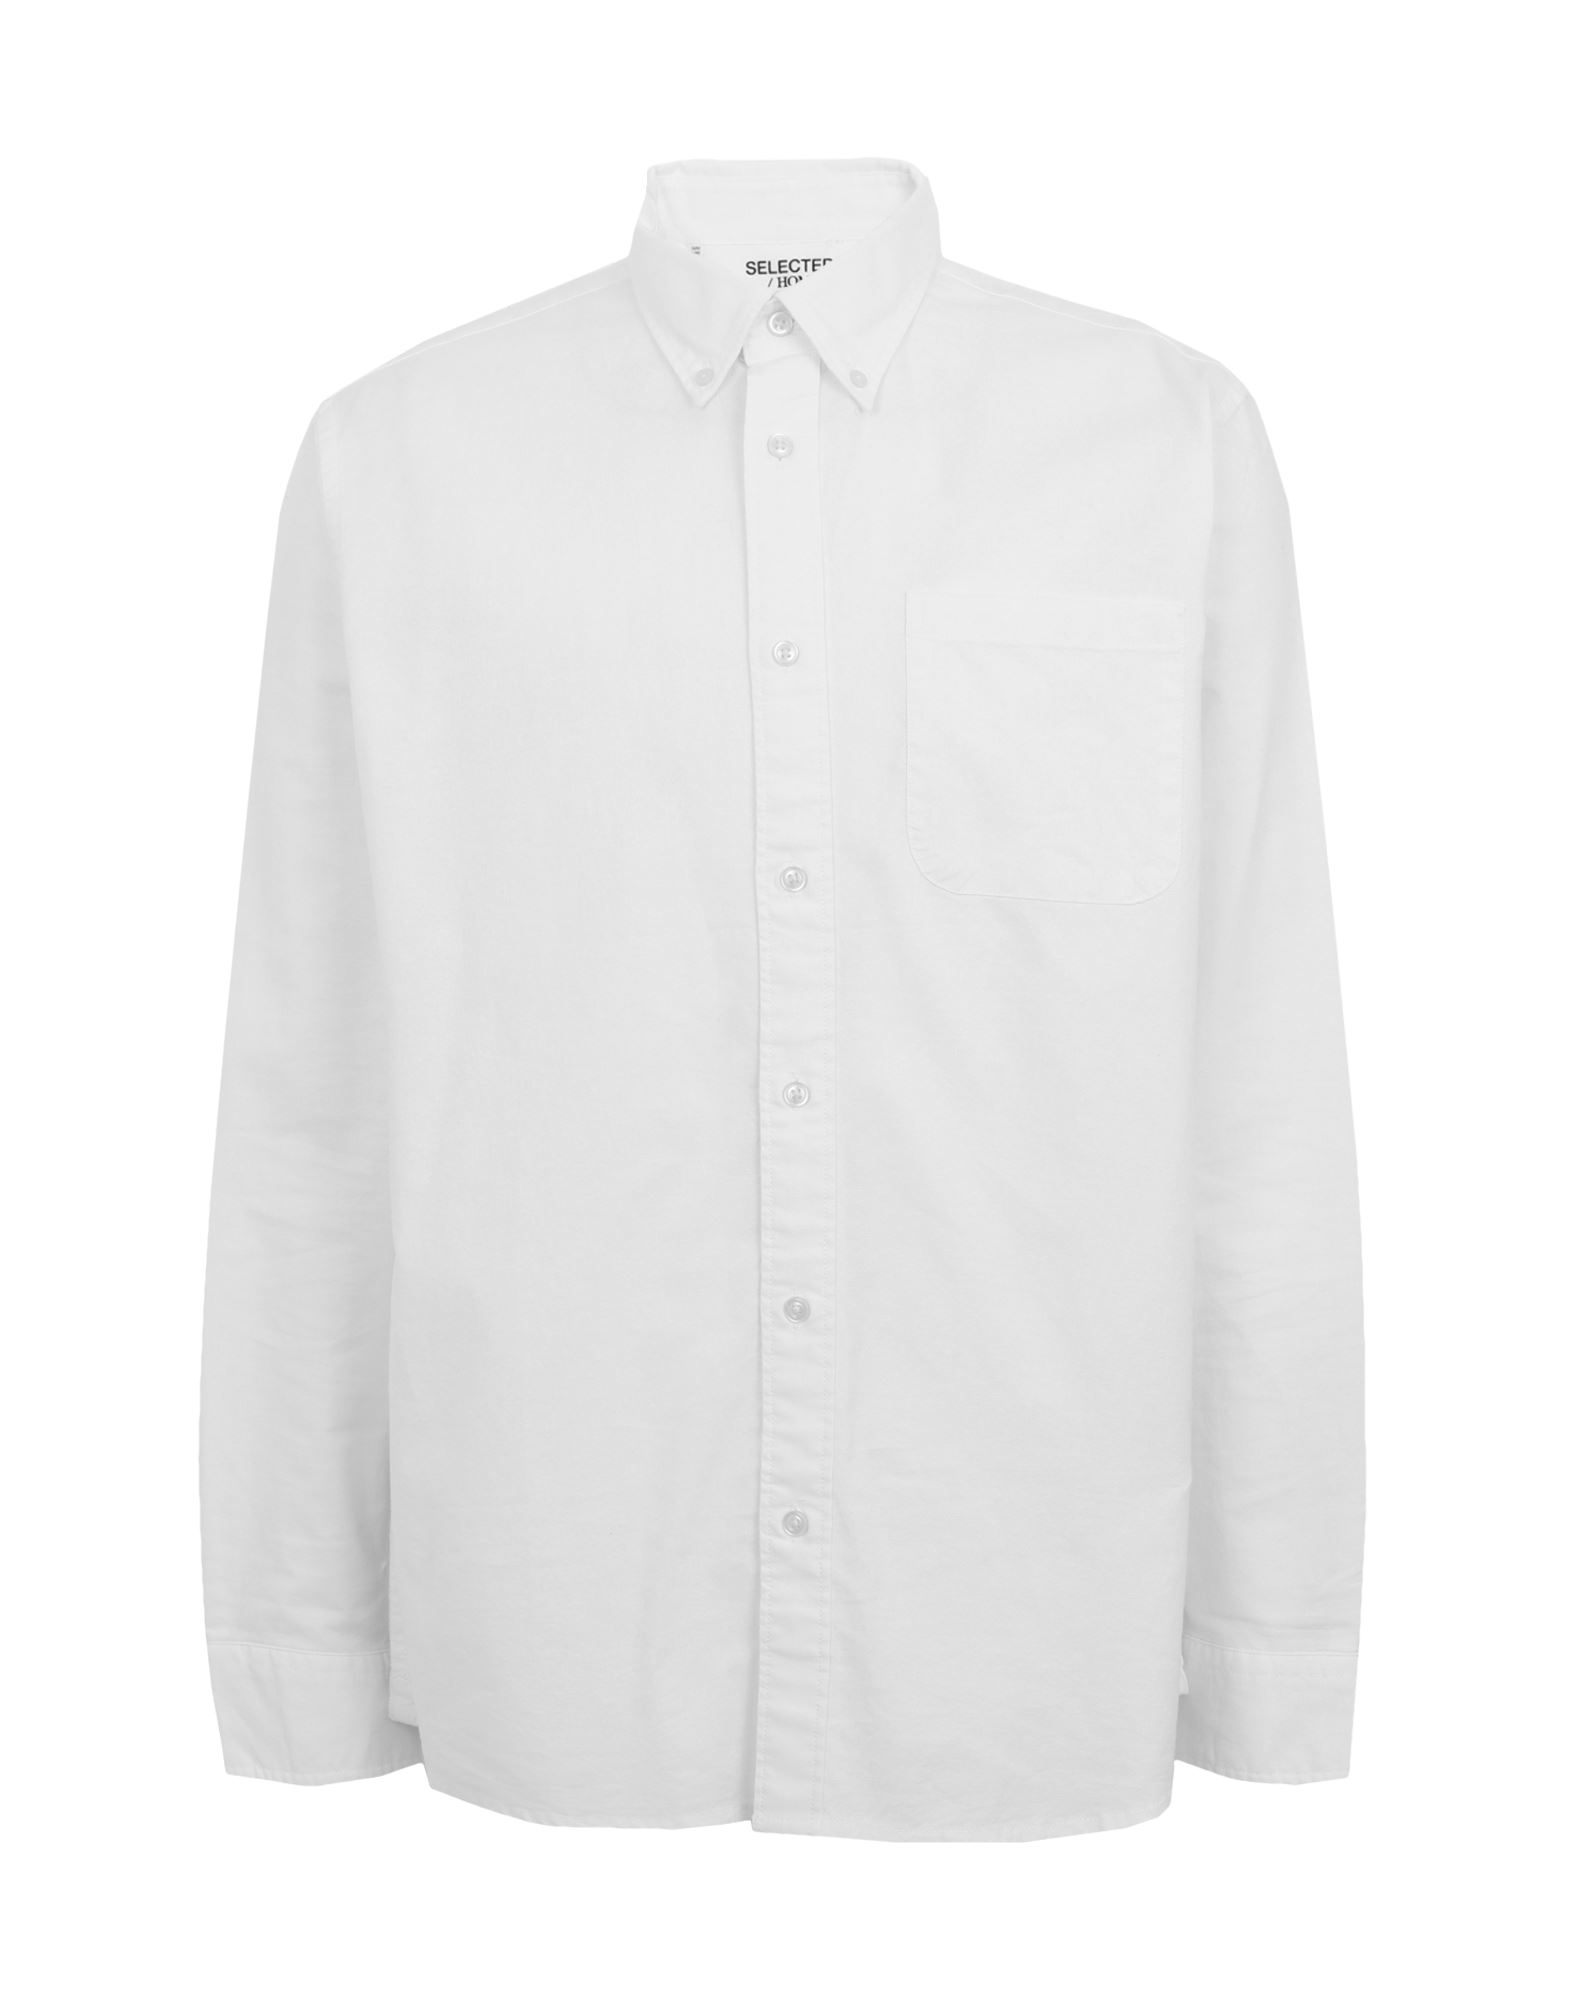 SELECTED HOMME SELECTED HOMME MAN SHIRT WHITE SIZE M ORGANIC COTTON, ELASTANE,38980339KR 7